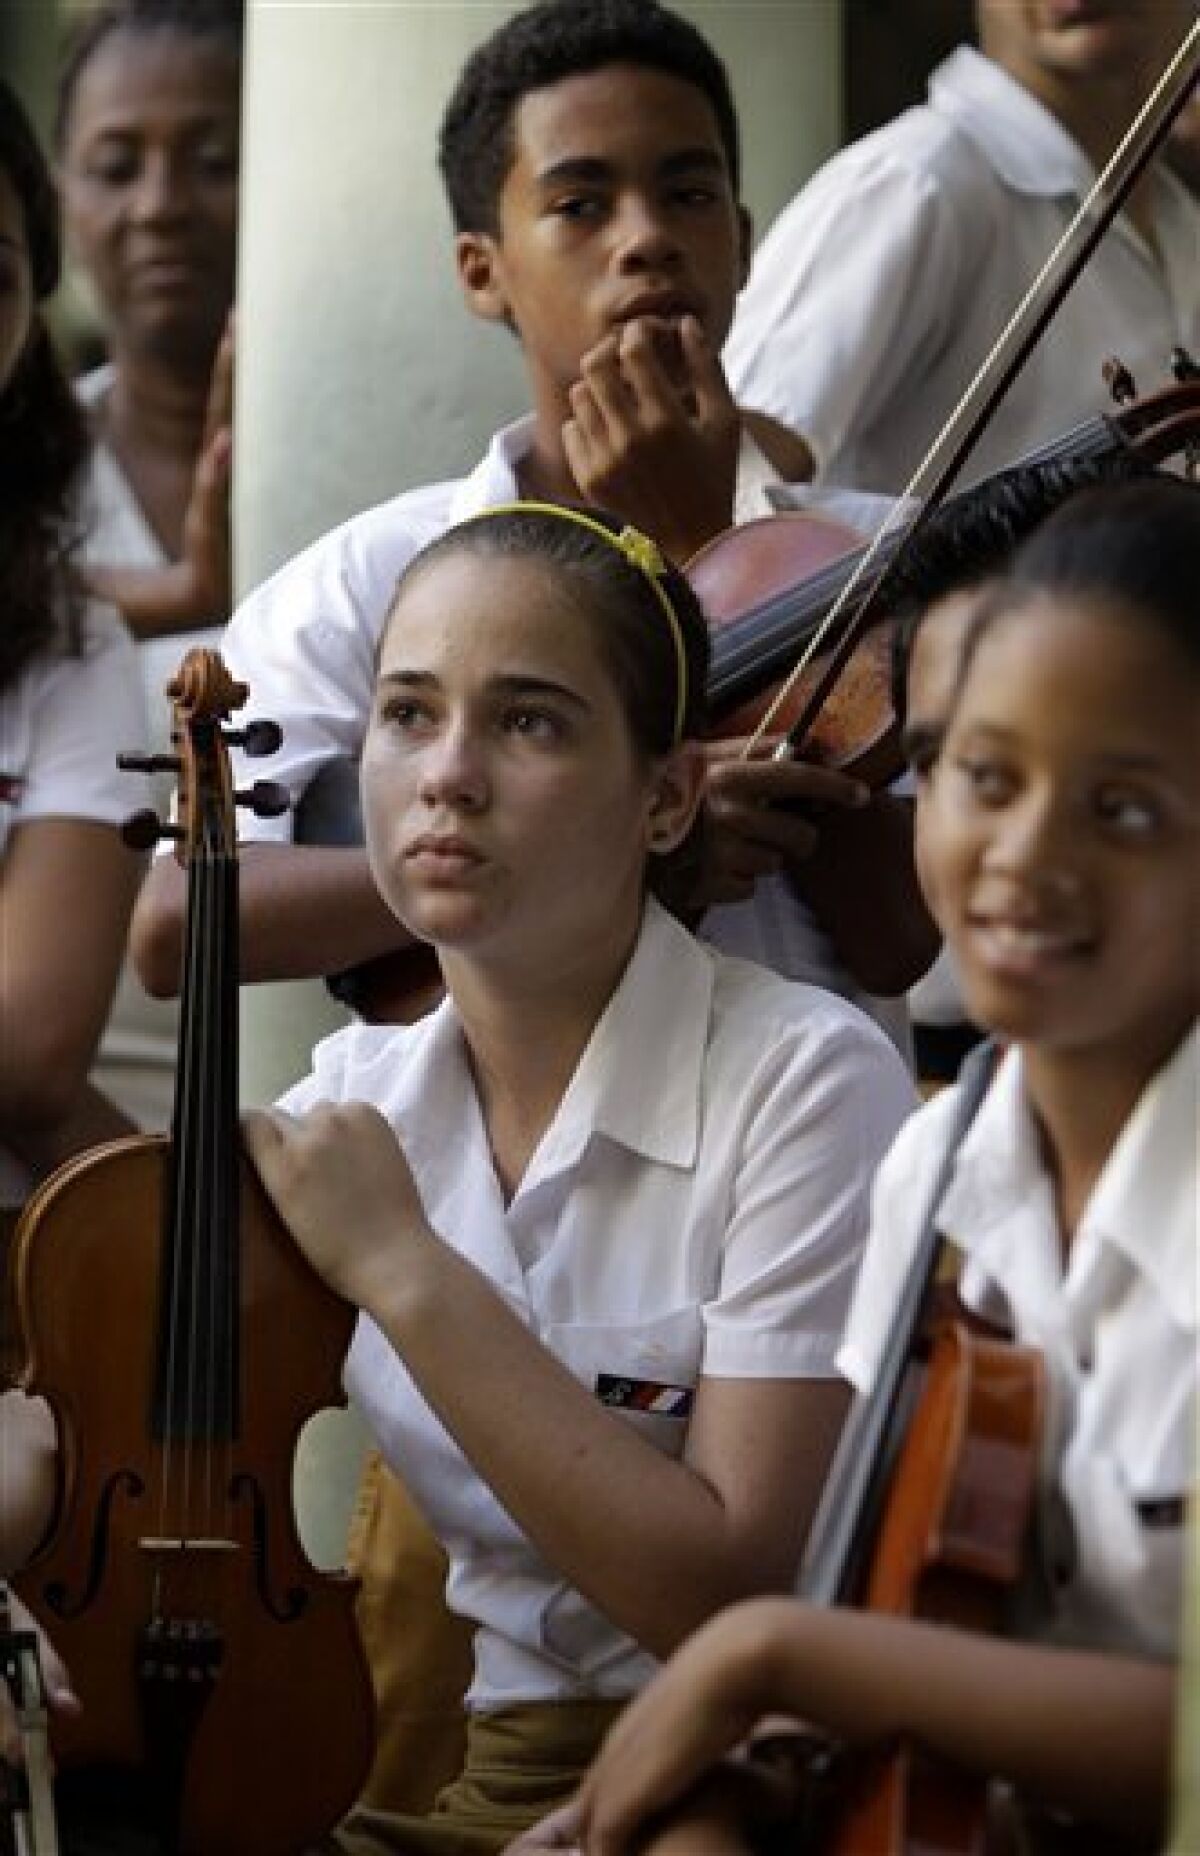 Students meet with members of the Jazz at Lincoln Center at the Conservatory School Guillermo Tomas in Havana, Cuba, Wednesday, Sept. 7, 2011. Jazz at Lincoln Center returned to the Caribbean island with instruments to be donated to four designated music schools and a group of talented musicians and luthiers who will impart workshops to students and also repair their damaged instruments on a week-long visit. (AP Photo/Javier Galeano)